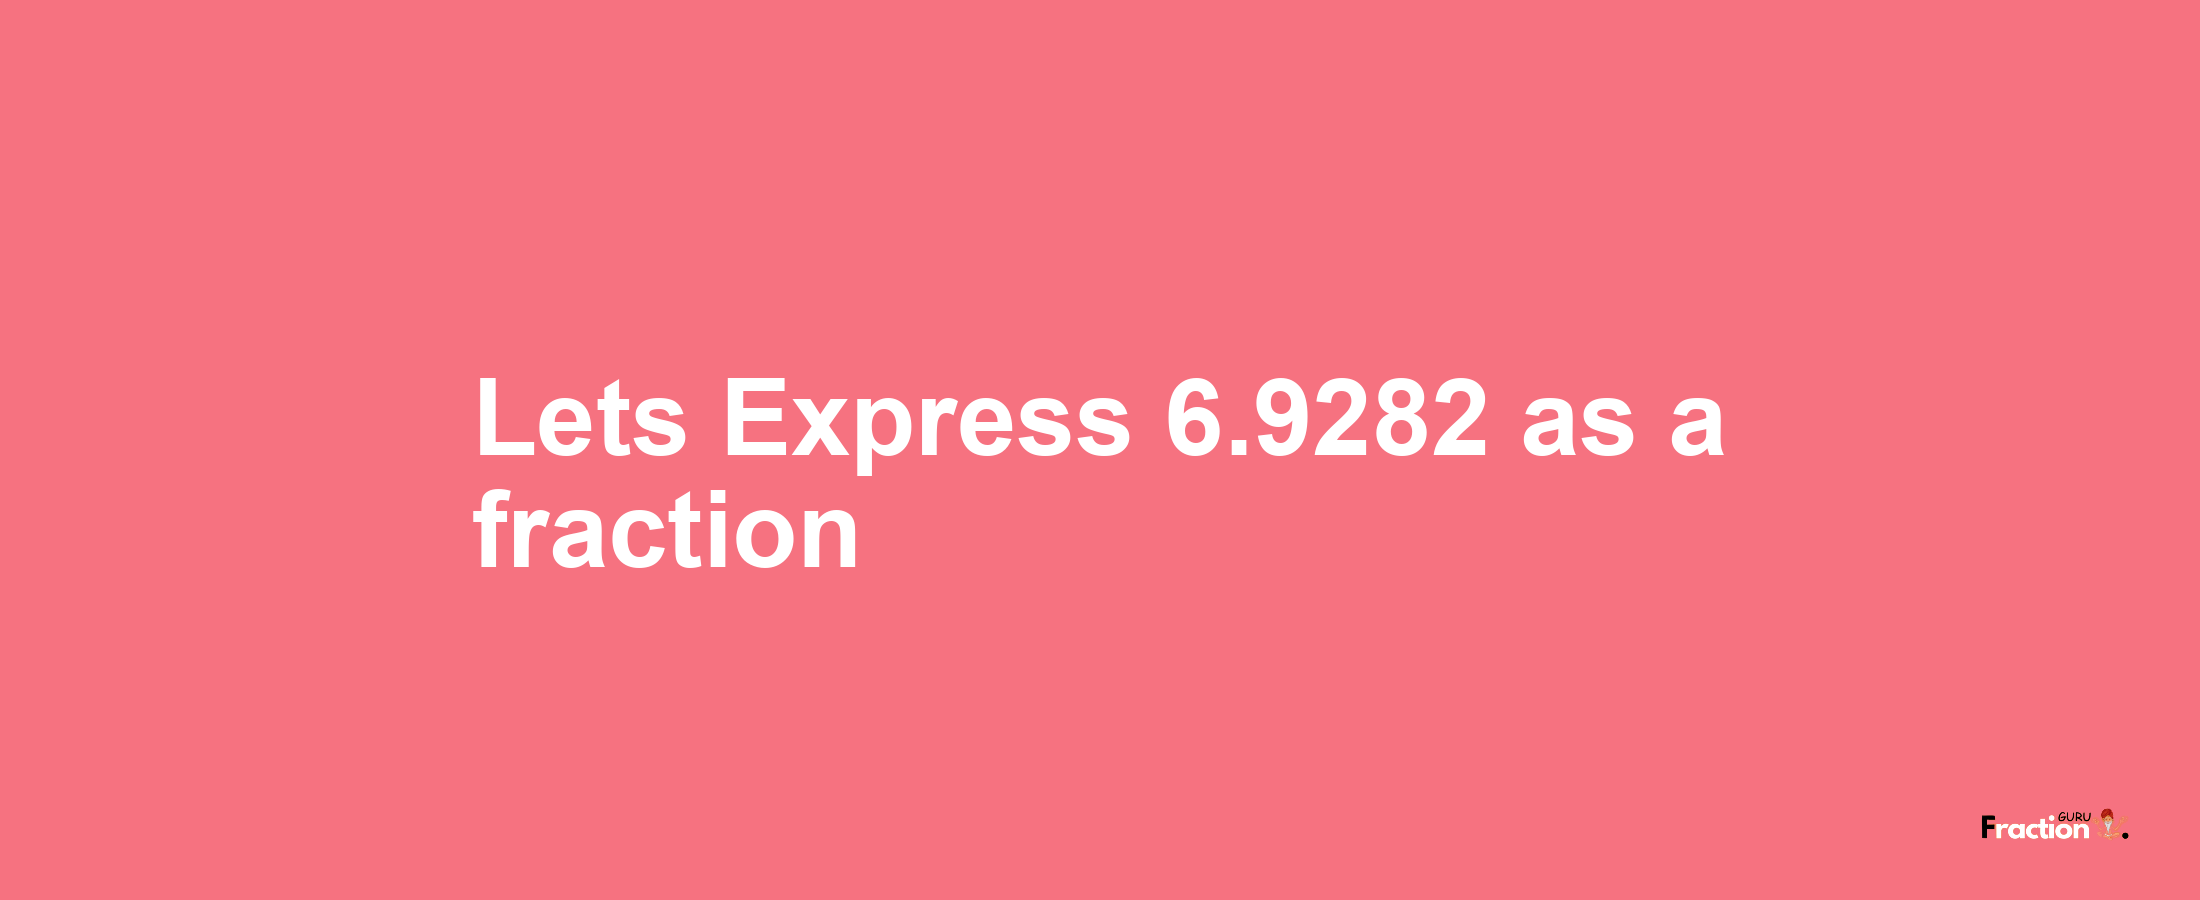 Lets Express 6.9282 as afraction